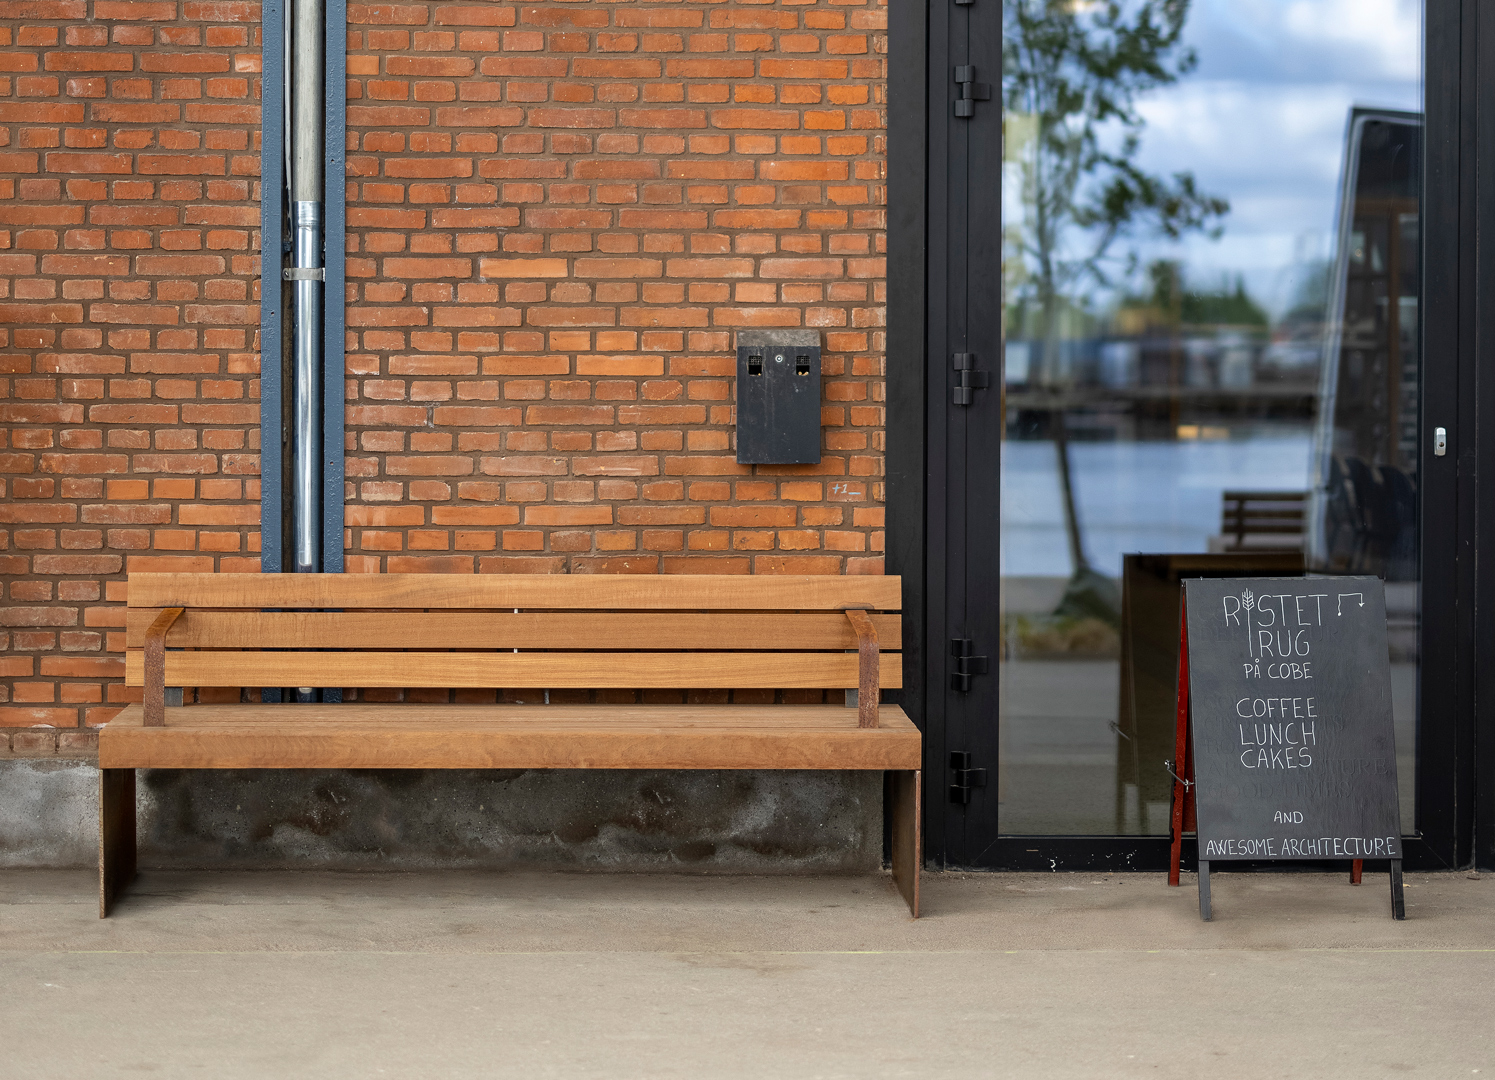 COSI bænk designed by Cobe is seen as street furniture